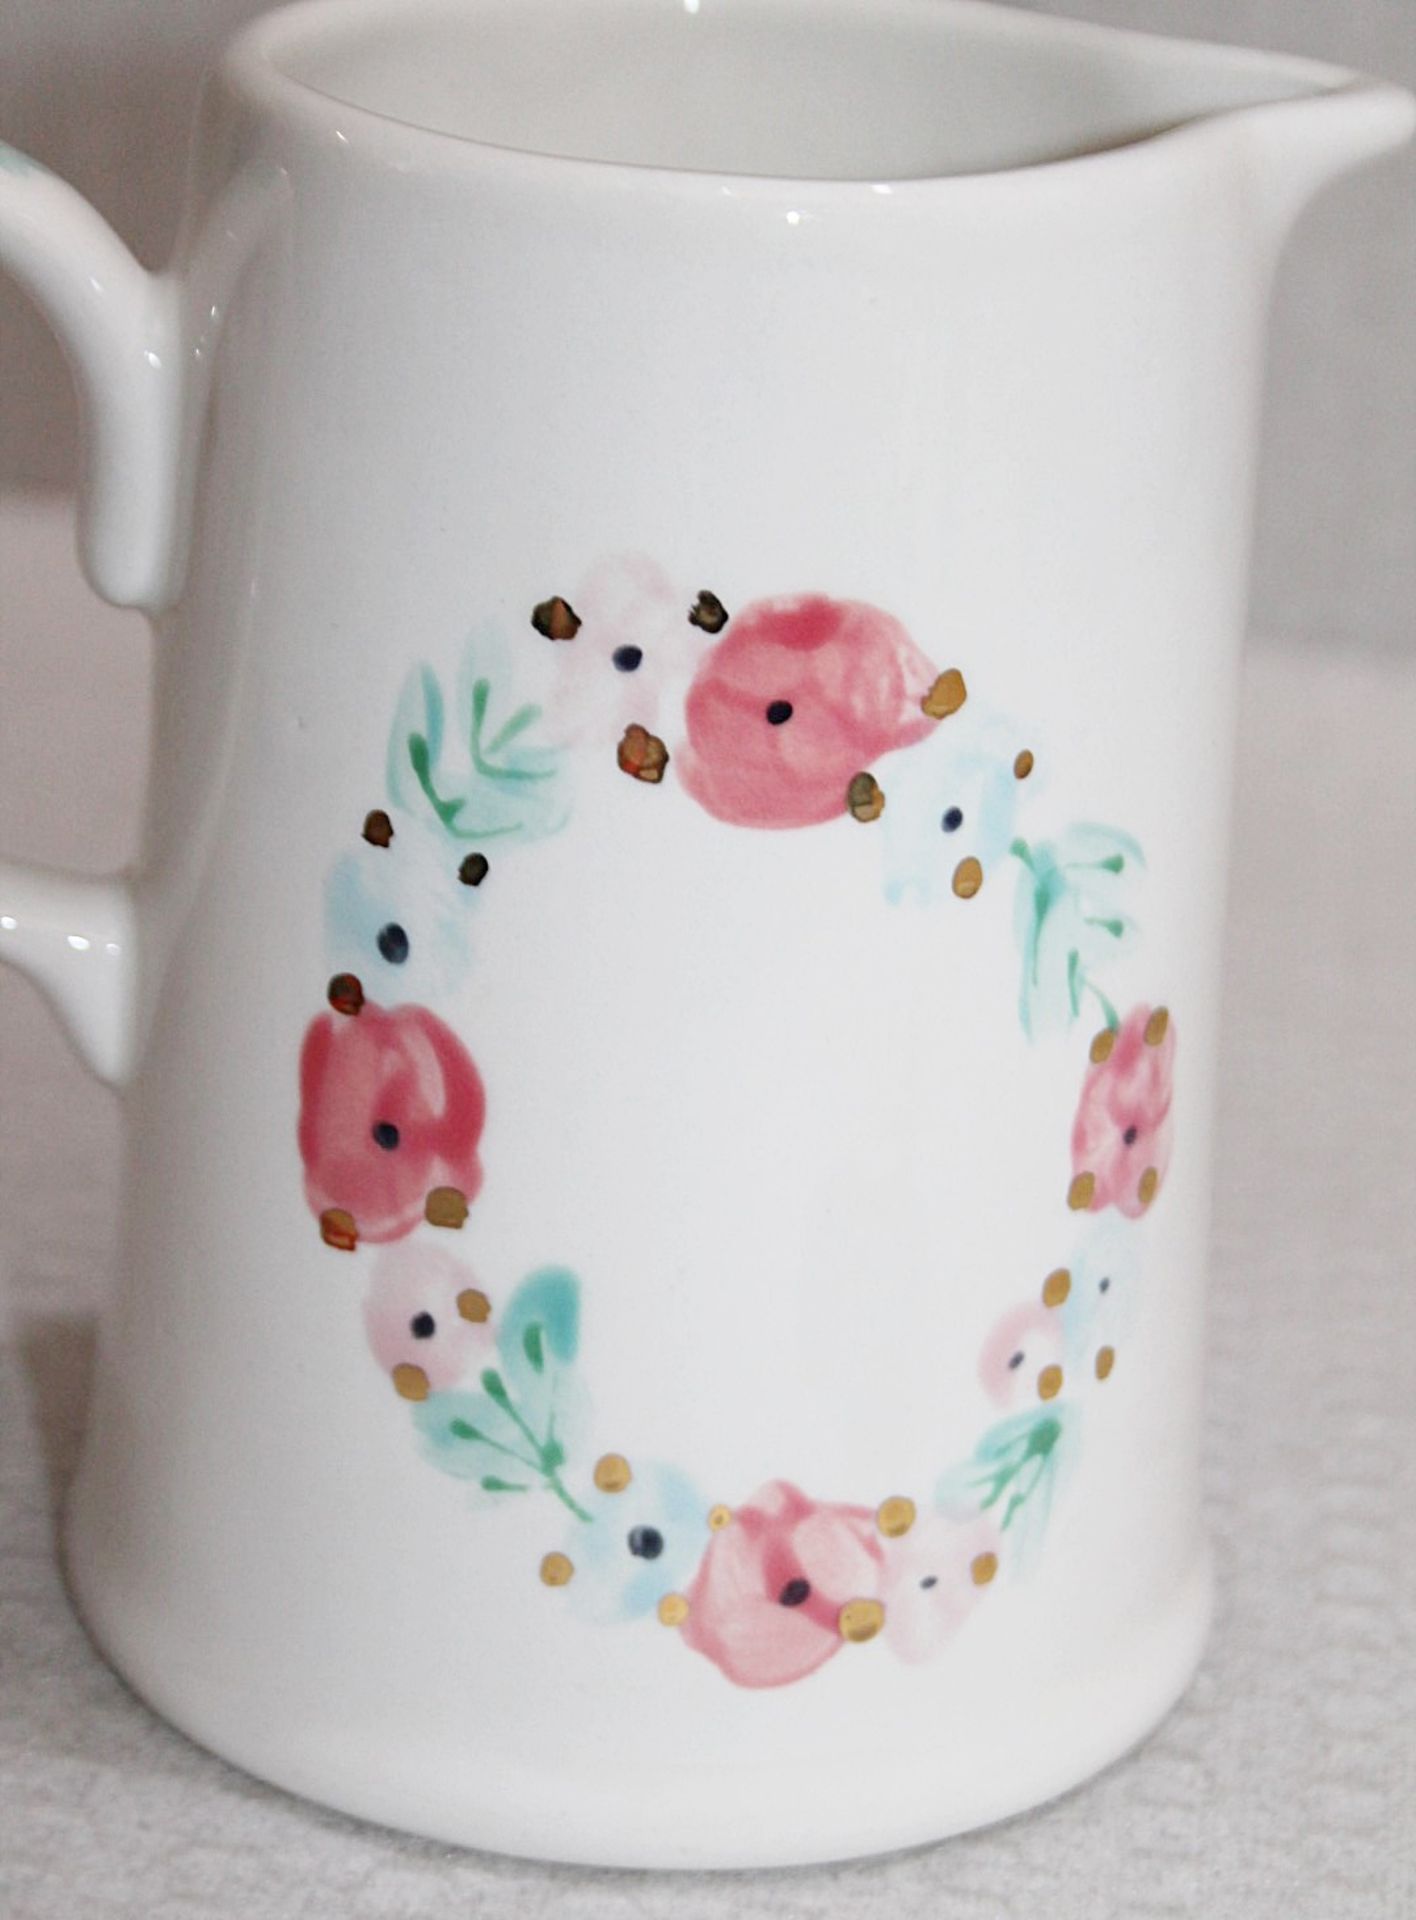 1 x Ceramic Handpainted Jug With Gilded Edging - Ex-Display Item From A London Department Store - - Image 5 of 7